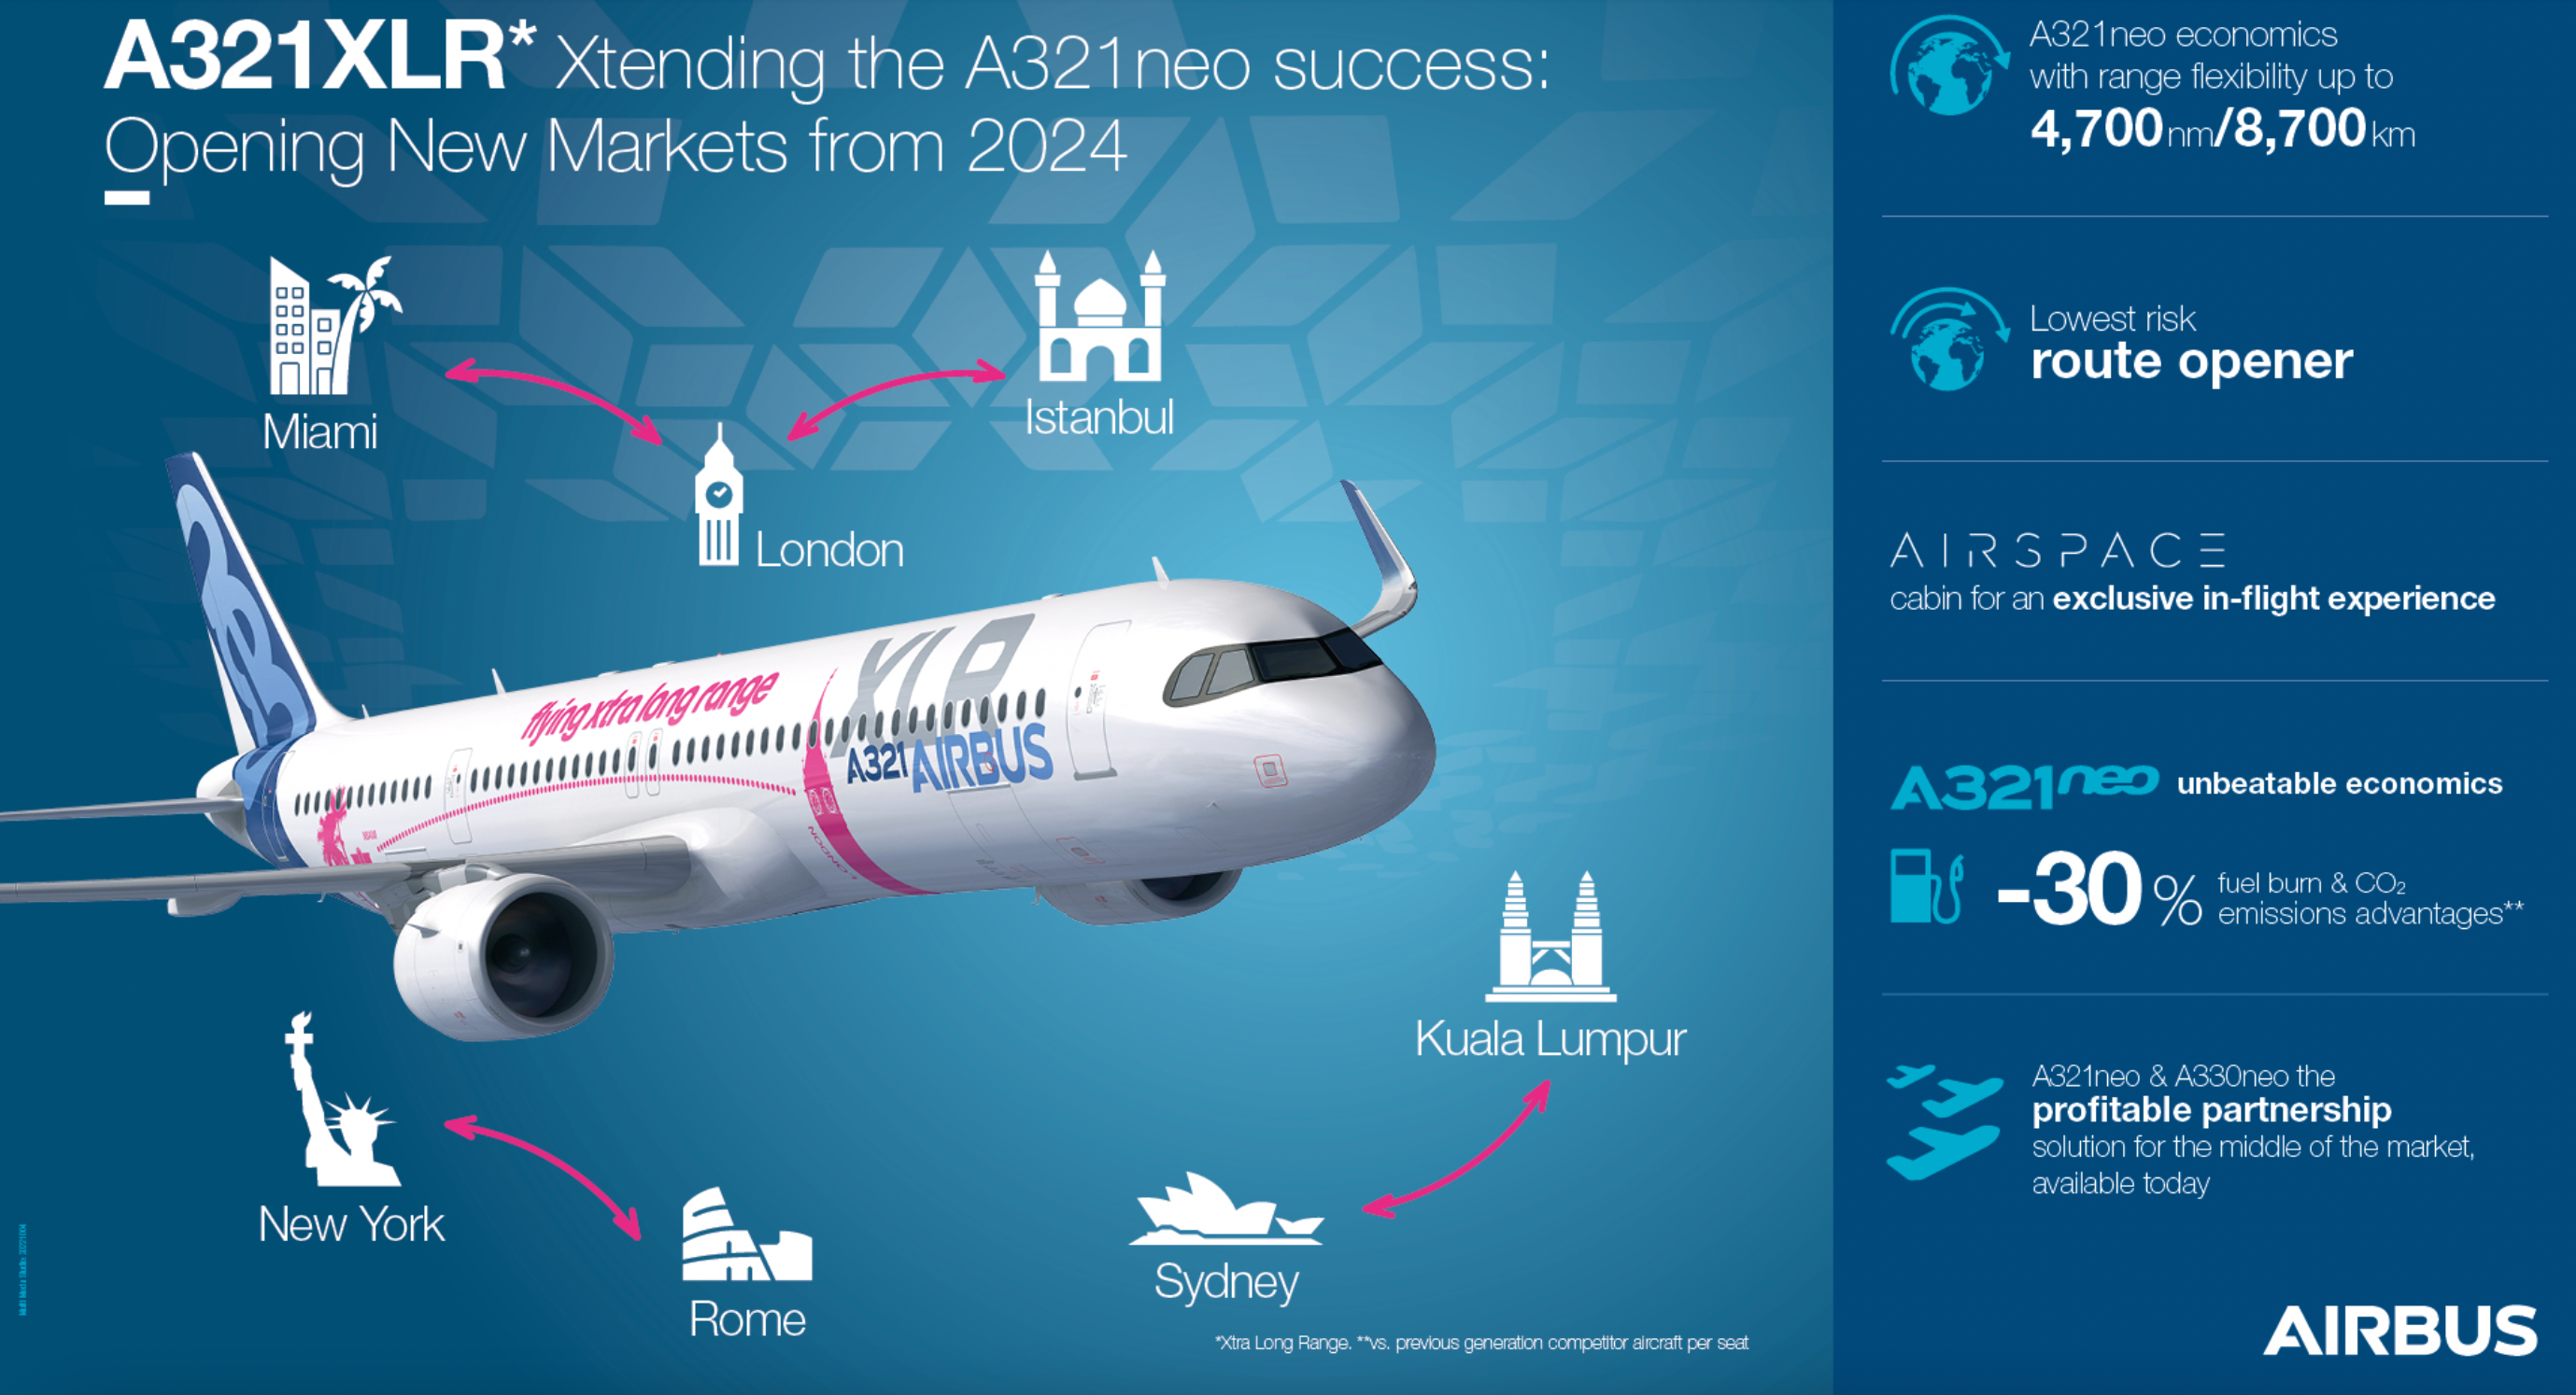 Airbus A321XLR makes its first flight today | World Airline News